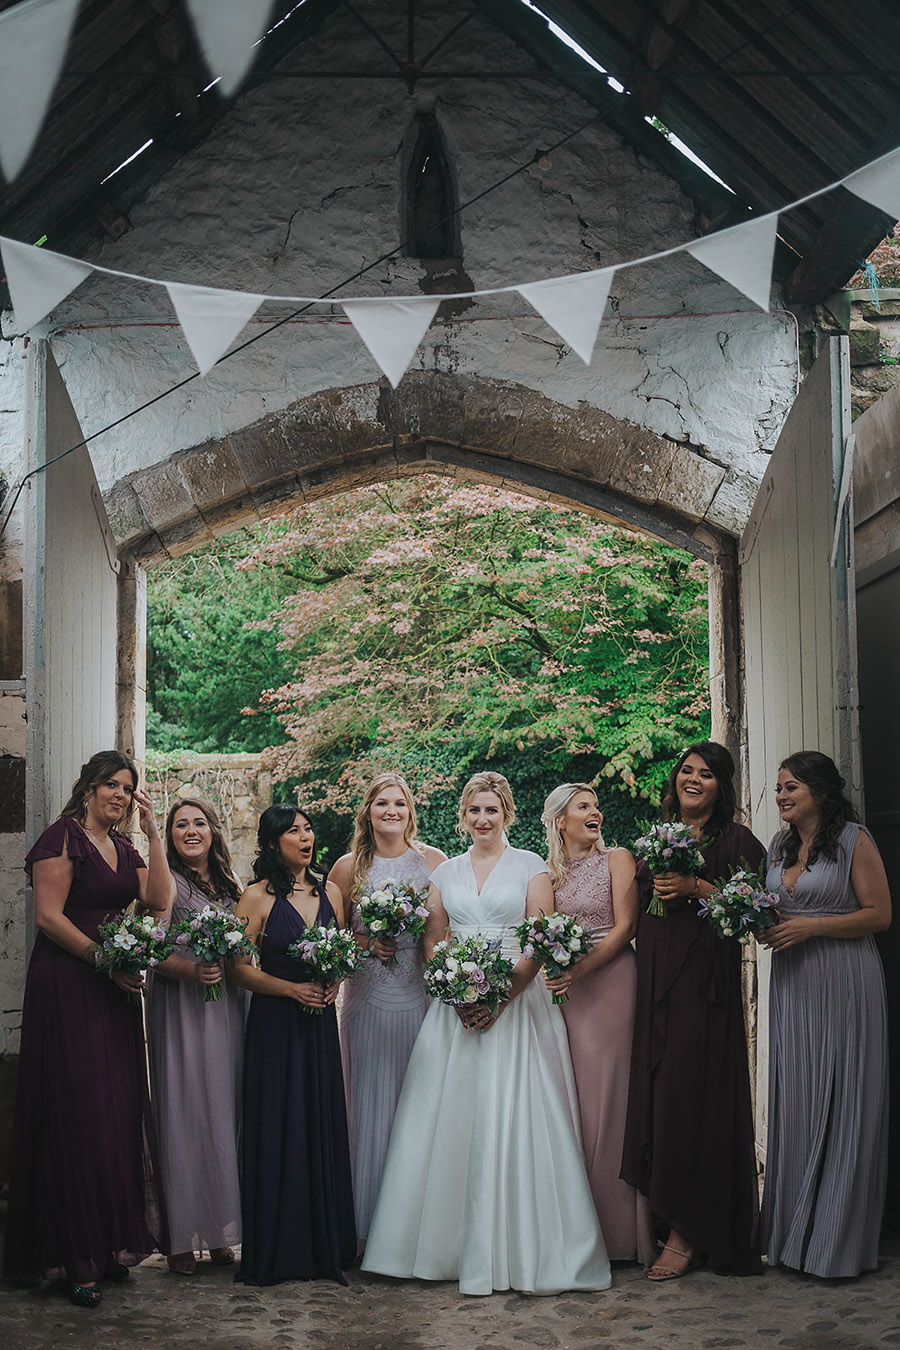 Kath & Adam's creative, DIY wedding at Wyresdale park, with Love Gets Sweeter and Claire Basiuk Photography (27)